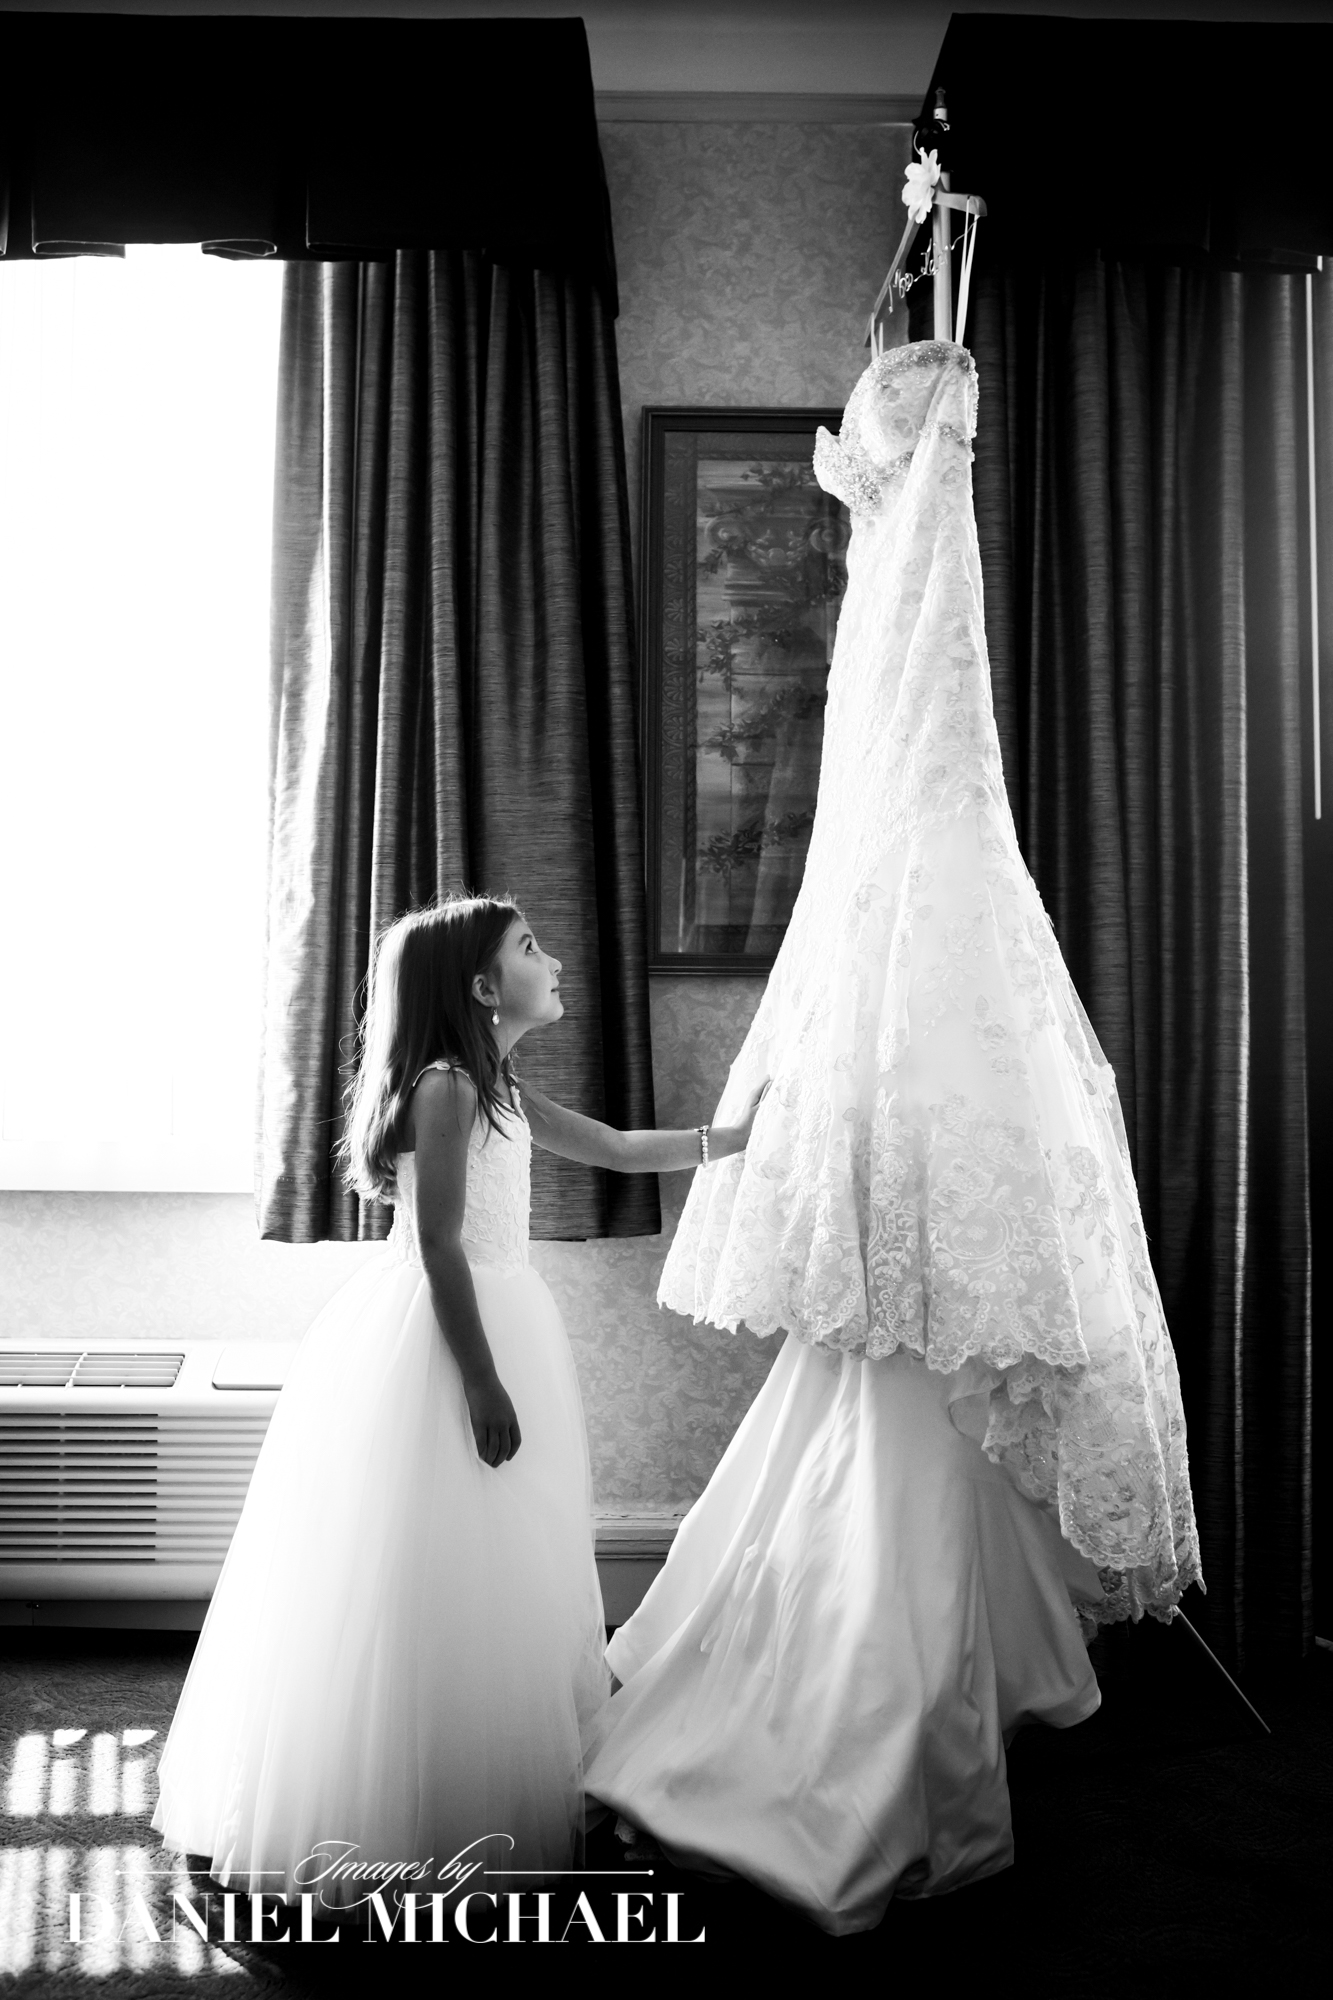 Flower Girl With Bride's Dress